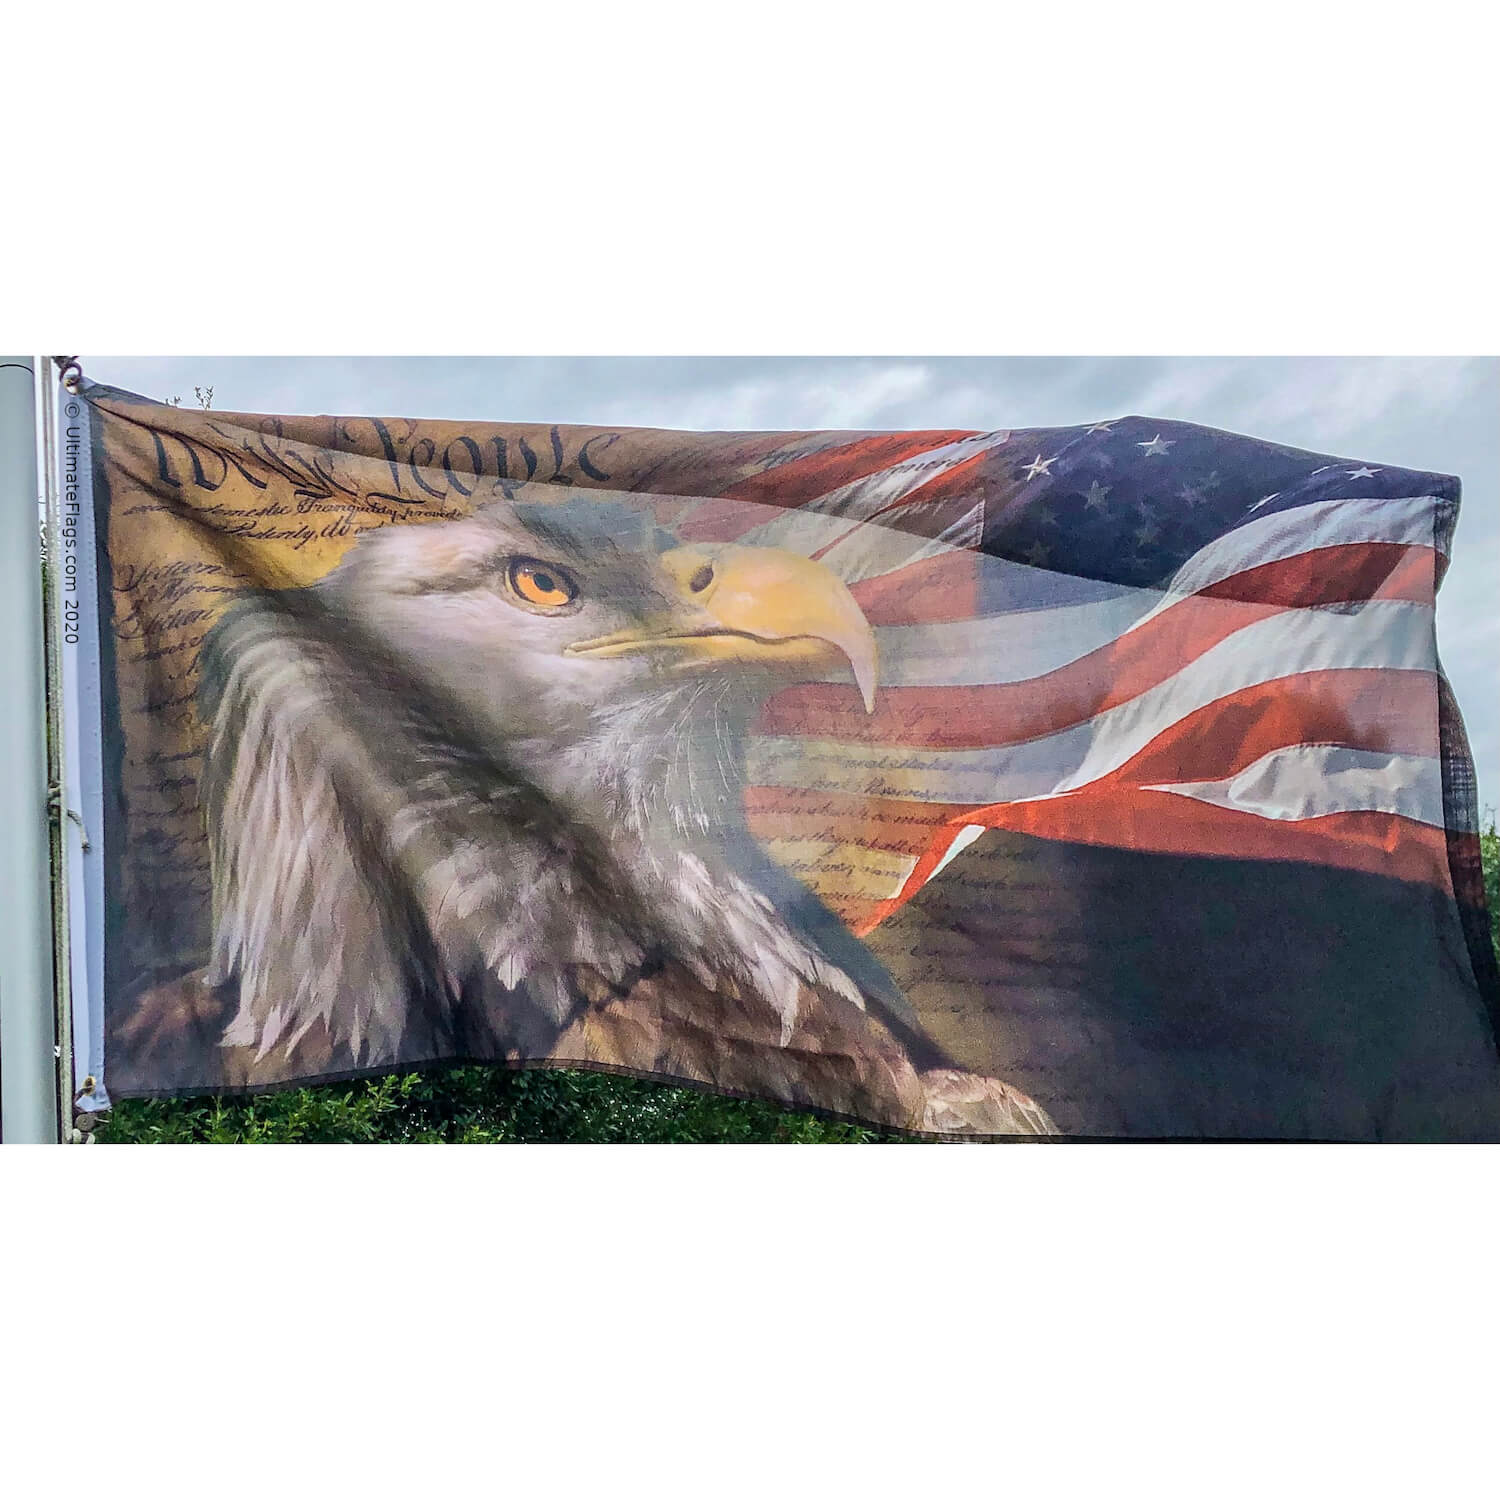 Embrace Patriotism with Flags from Ultimate Flags Inc